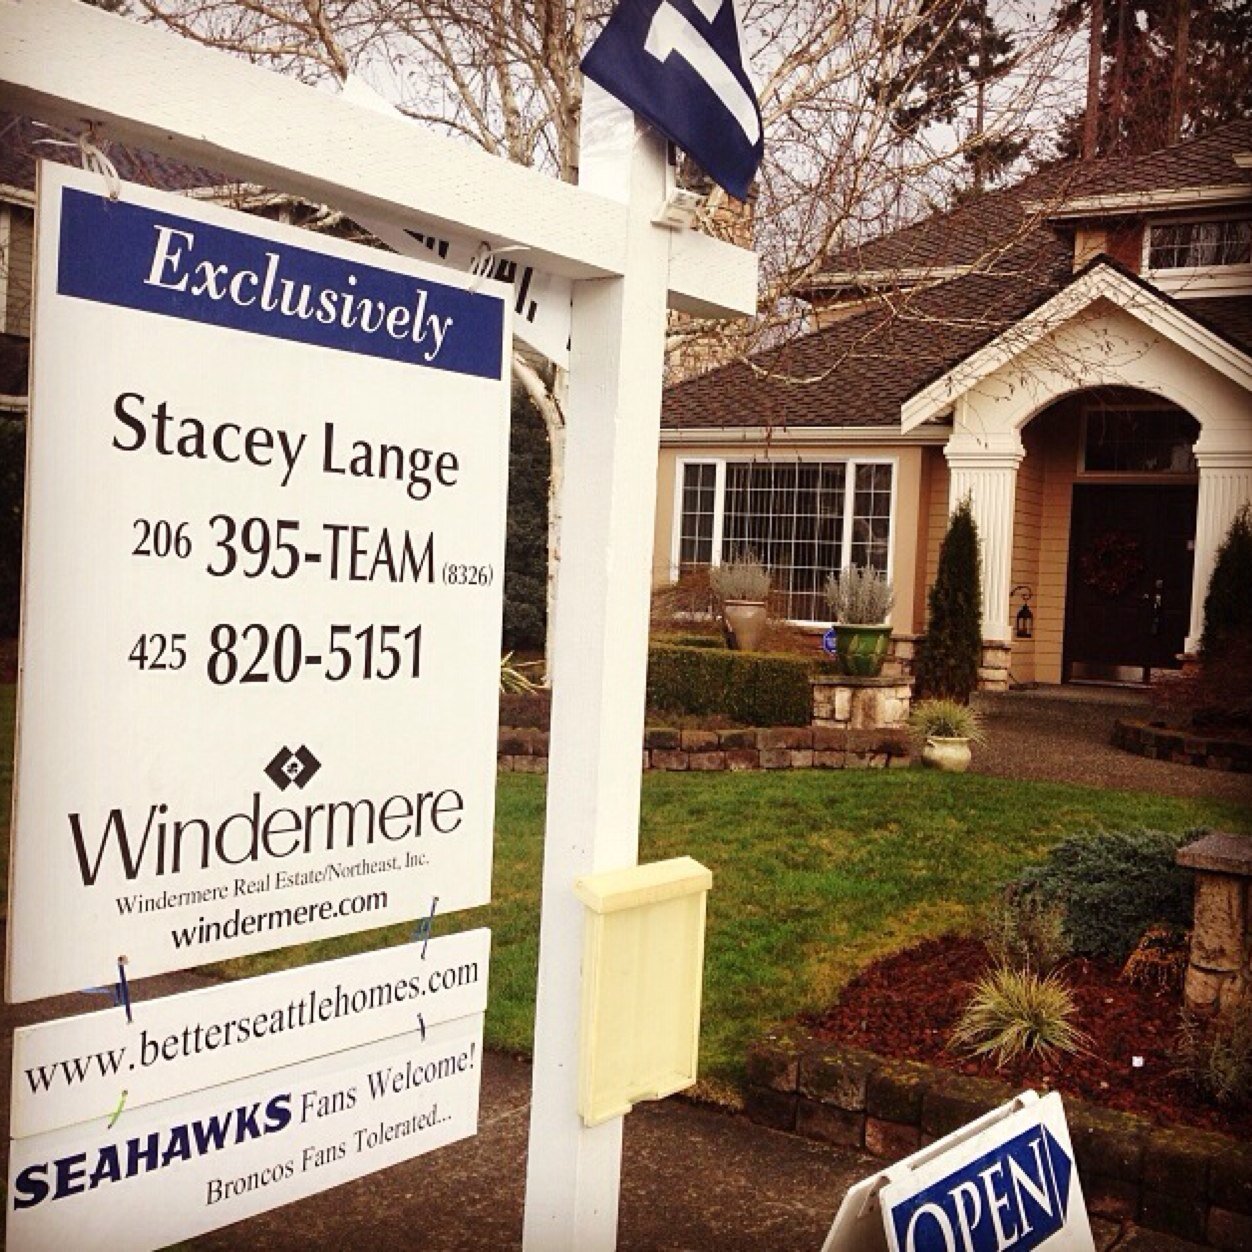 Seattle WA Realtor | Windermere Real Estate | ☎️ 425.876.6164 | Buy. Sell. Rent. Specializing in King & Snohomish Counties | Go Hawks 1️⃣2️⃣